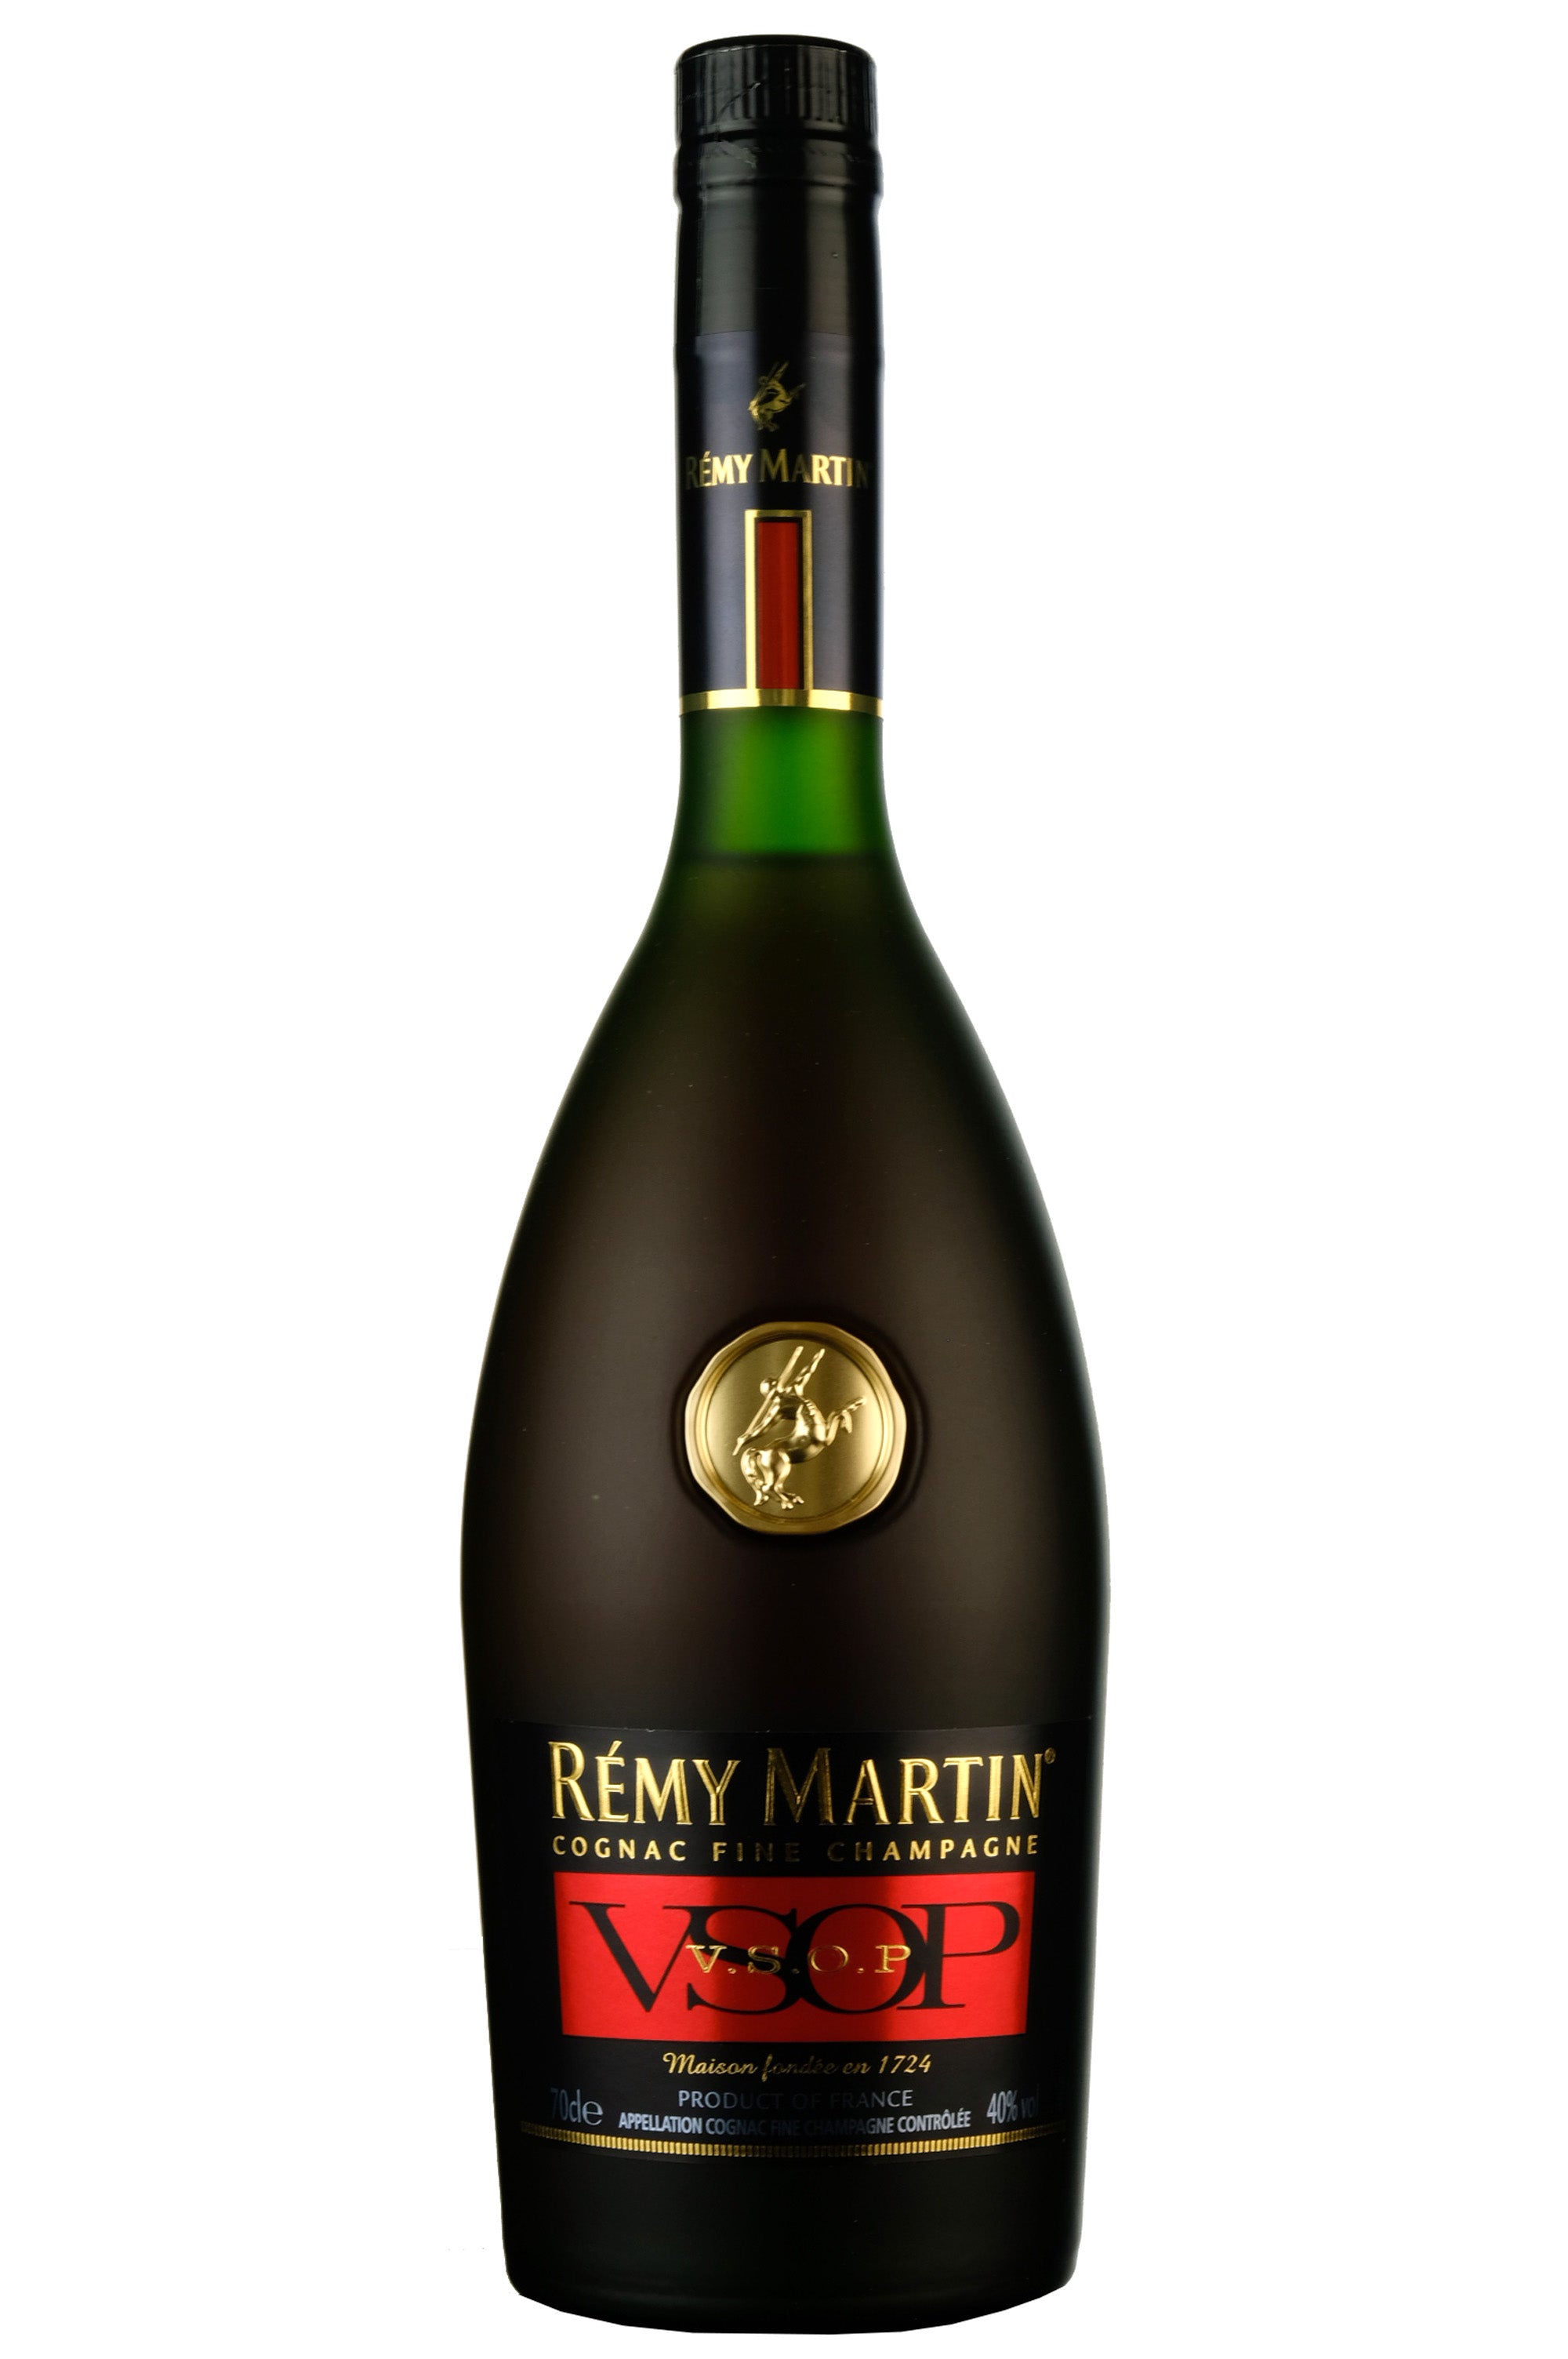 Remy Martin, Other